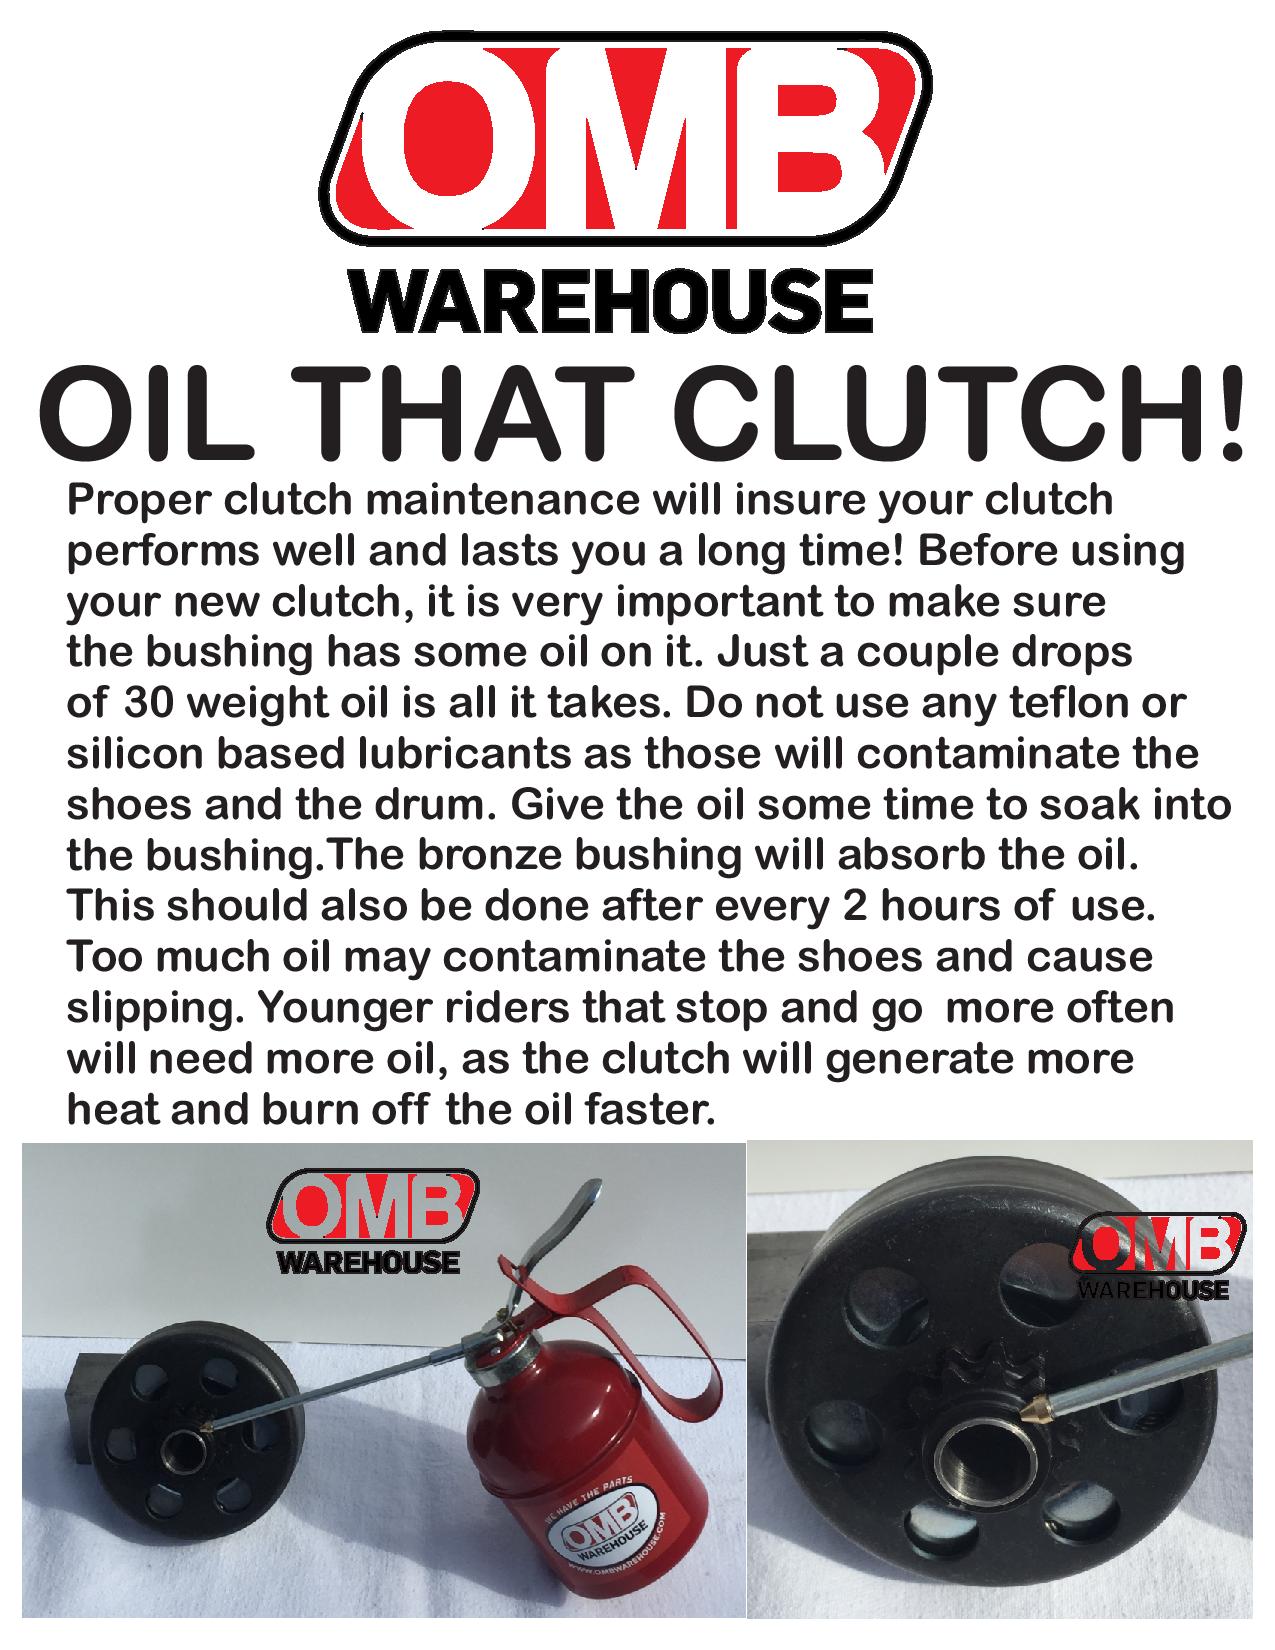 OMBW_OIL_that_clutch-page-001.jpg